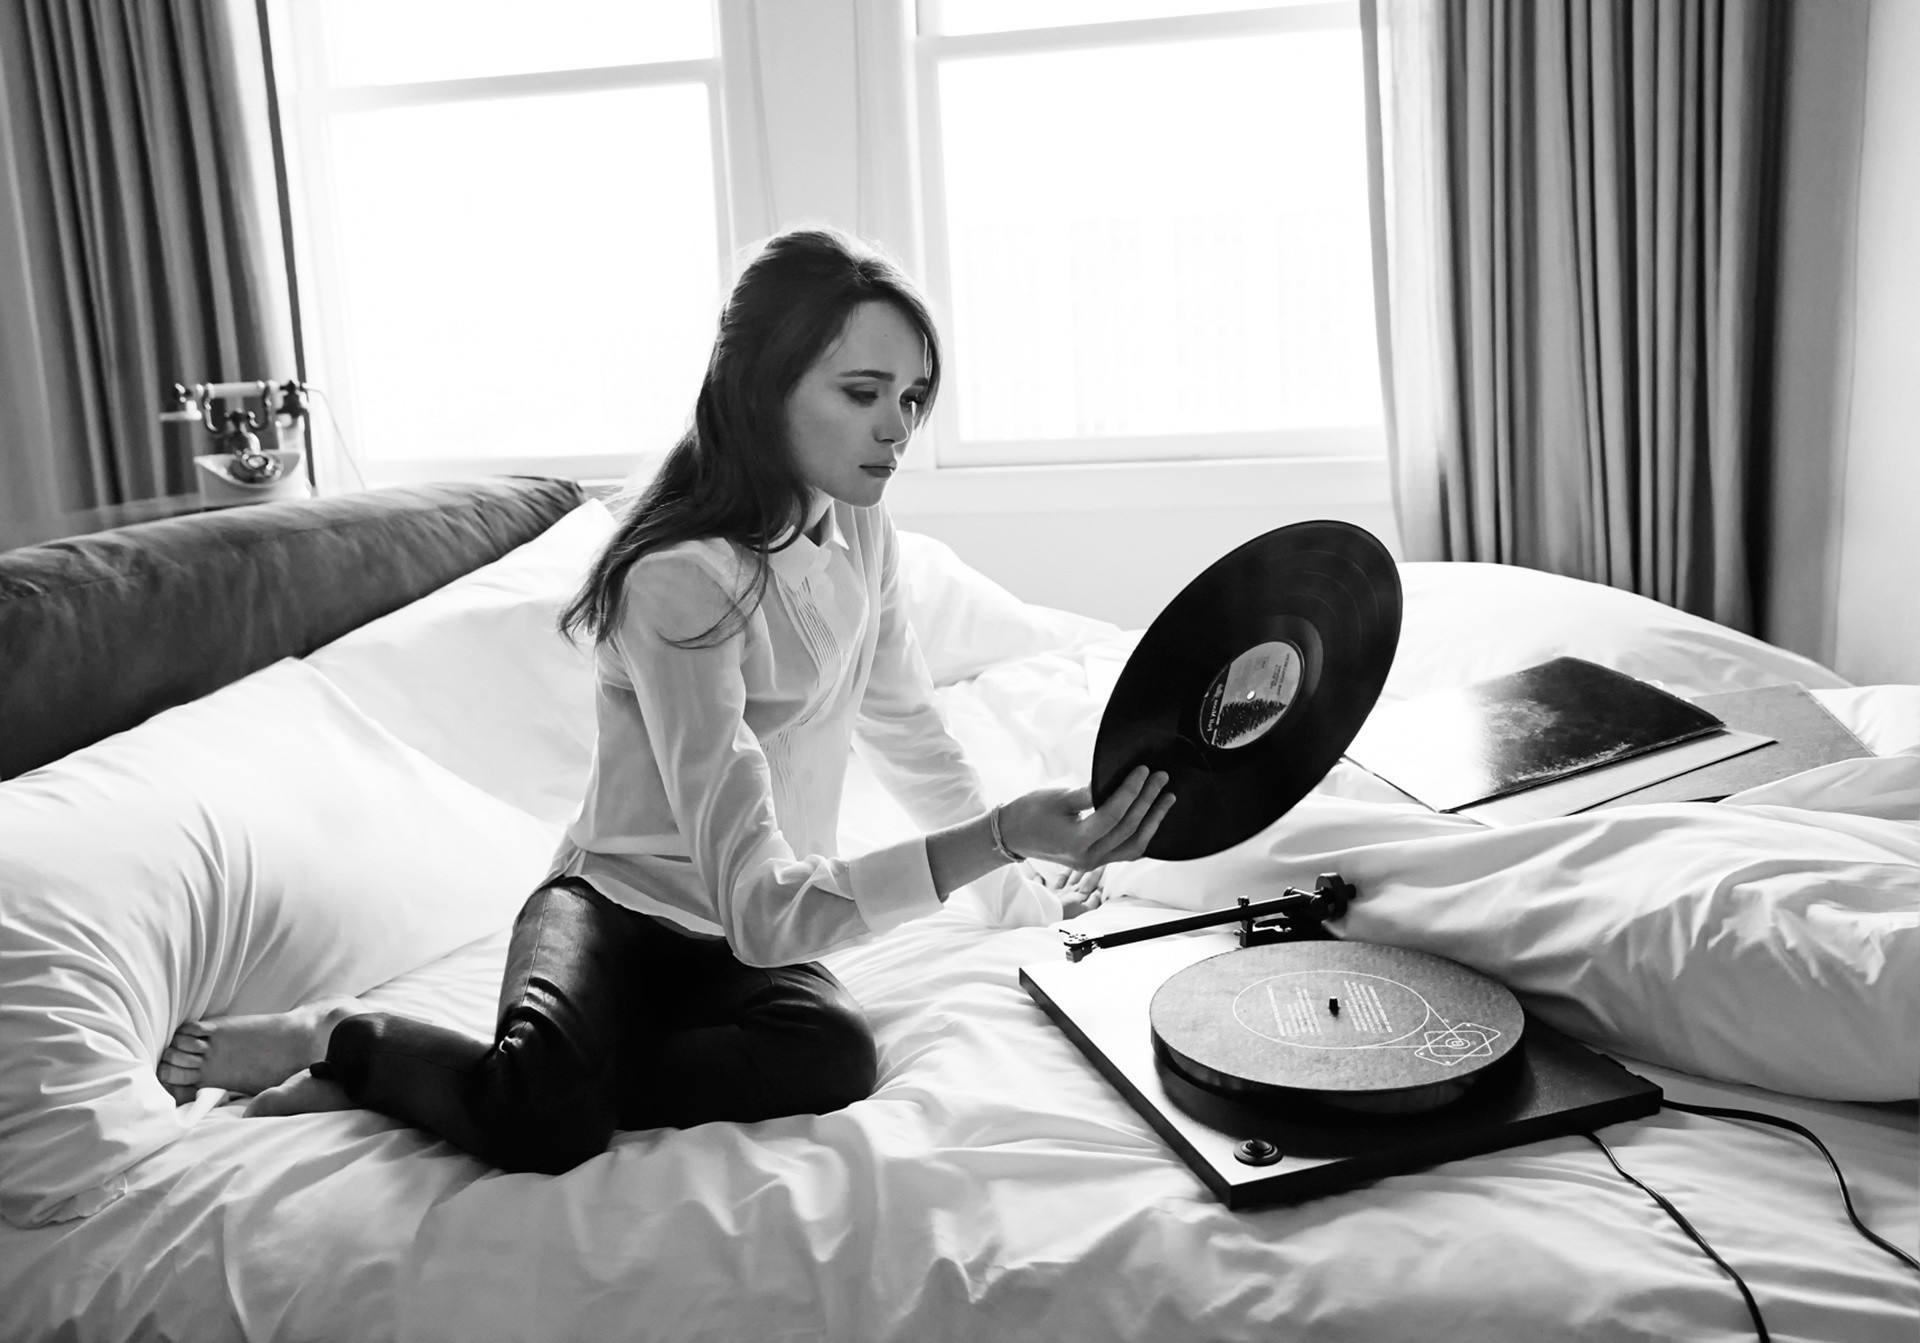 women, Actress, Brunette, Long Hair, Sitting, Ellen Page, In Bed, Barefoot, Monochrome, Blouses, Vinyl, Gramophone, Leather Pants, Telephone, Curtain Wallpaper